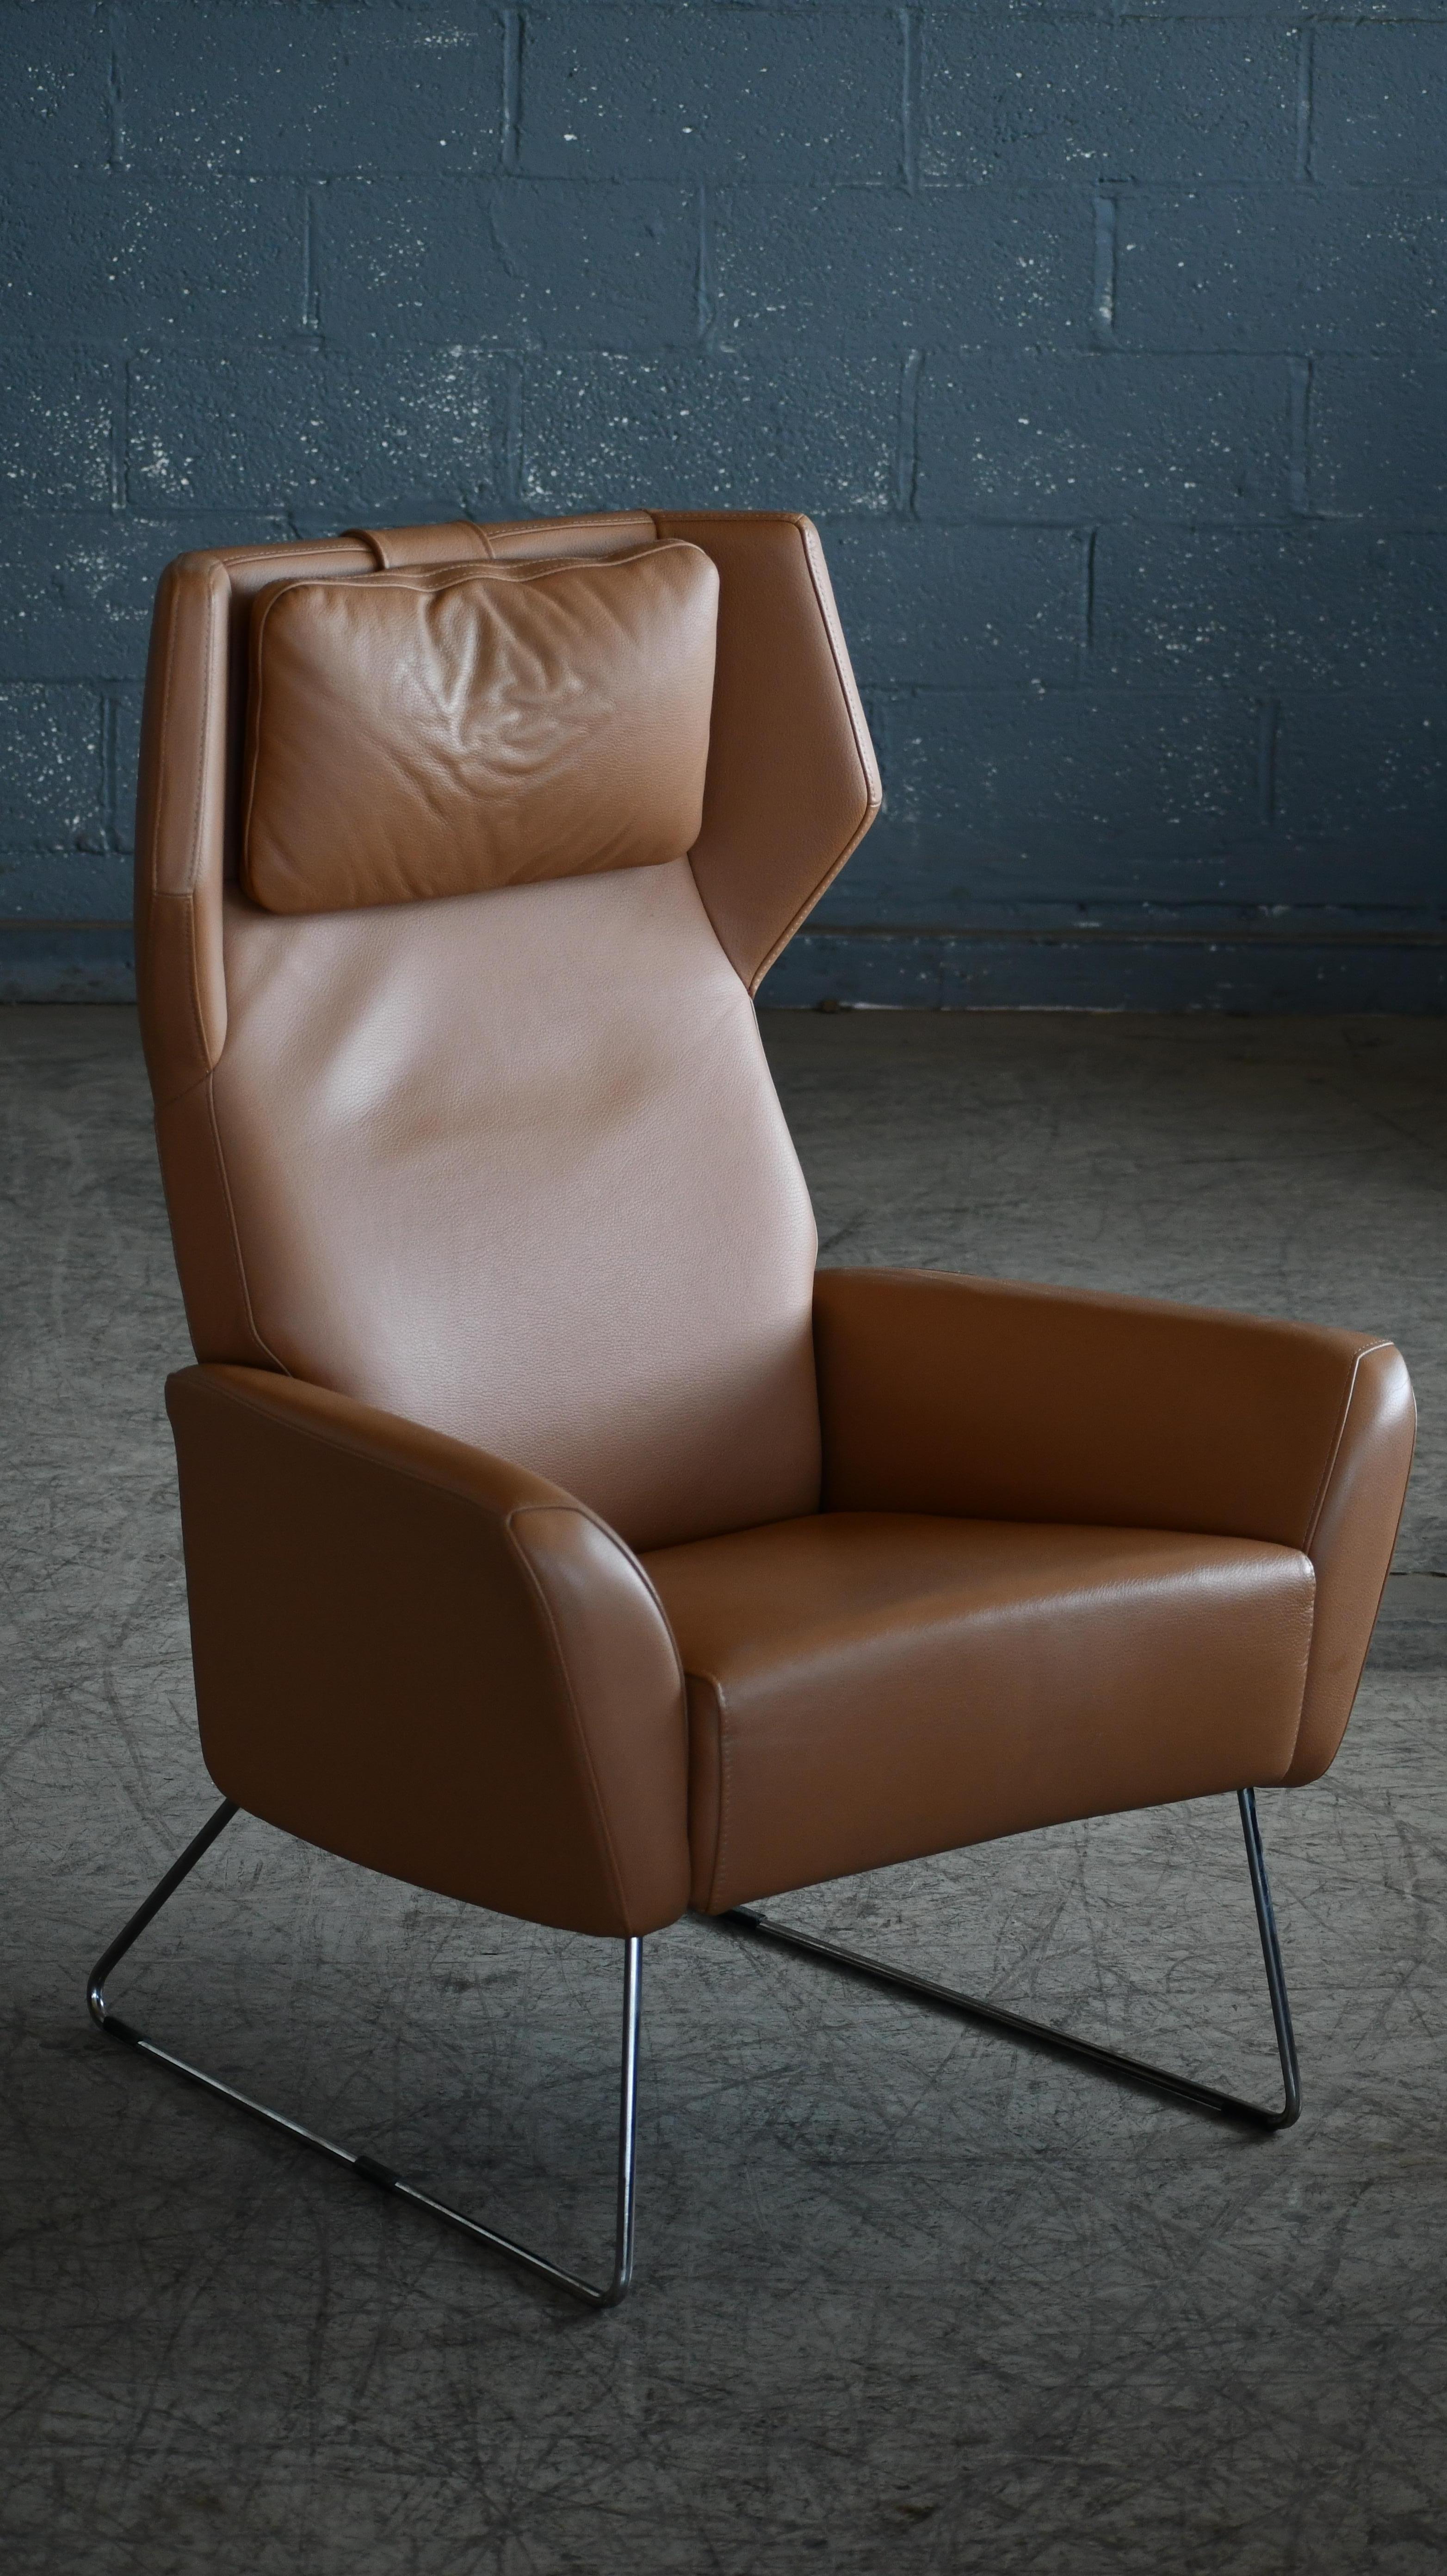 Swedish Scandinavian Highback Leather Chair with Ottoman in Beige Leather by Swedese  For Sale